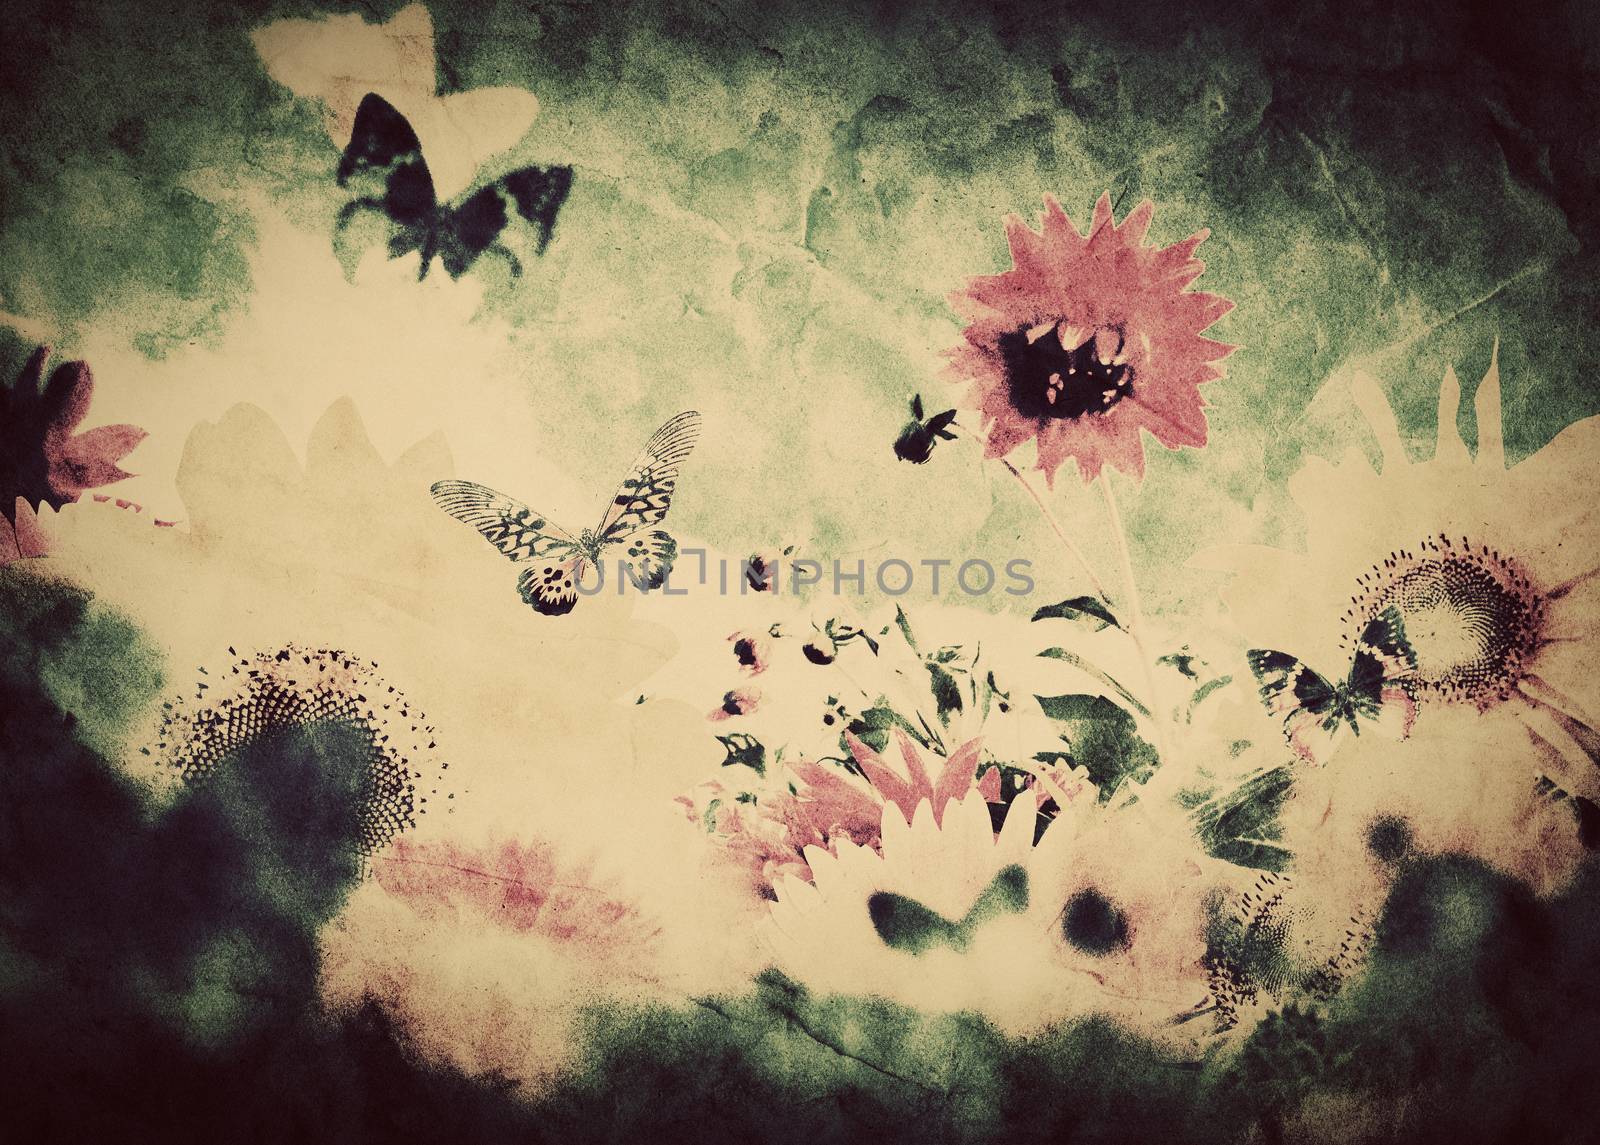 Vintage image of flowers and butterfly at spring summer time. Retro, grunge style texture or background